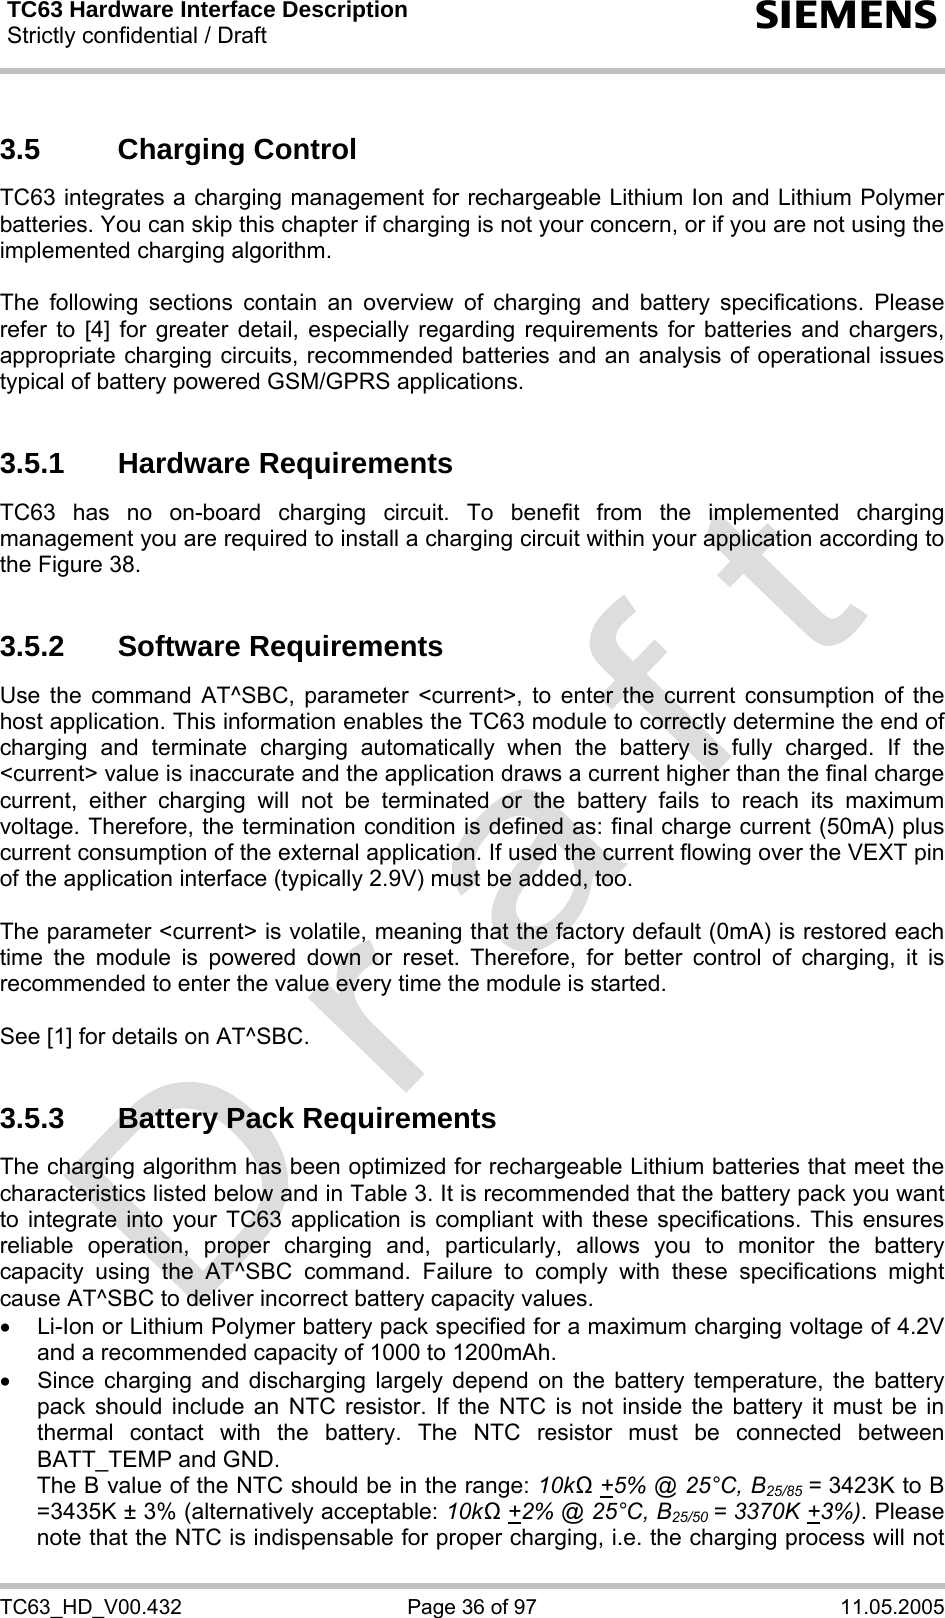 TC63 Hardware Interface Description Strictly confidential / Draft  s TC63_HD_V00.432  Page 36 of 97  11.05.2005 3.5 Charging Control TC63 integrates a charging management for rechargeable Lithium Ion and Lithium Polymer batteries. You can skip this chapter if charging is not your concern, or if you are not using the implemented charging algorithm.  The following sections contain an overview of charging and battery specifications. Please refer to [4] for greater detail, especially regarding requirements for batteries and chargers, appropriate charging circuits, recommended batteries and an analysis of operational issues typical of battery powered GSM/GPRS applications.  3.5.1 Hardware Requirements TC63 has no on-board charging circuit. To benefit from the implemented charging management you are required to install a charging circuit within your application according to the Figure 38.   3.5.2 Software Requirements Use the command AT^SBC, parameter &lt;current&gt;, to enter the current consumption of the host application. This information enables the TC63 module to correctly determine the end of charging and terminate charging automatically when the battery is fully charged. If the &lt;current&gt; value is inaccurate and the application draws a current higher than the final charge current, either charging will not be terminated or the battery fails to reach its maximum voltage. Therefore, the termination condition is defined as: final charge current (50mA) plus current consumption of the external application. If used the current flowing over the VEXT pin of the application interface (typically 2.9V) must be added, too.   The parameter &lt;current&gt; is volatile, meaning that the factory default (0mA) is restored each time the module is powered down or reset. Therefore, for better control of charging, it is recommended to enter the value every time the module is started.  See [1] for details on AT^SBC.  3.5.3  Battery Pack Requirements The charging algorithm has been optimized for rechargeable Lithium batteries that meet the characteristics listed below and in Table 3. It is recommended that the battery pack you want to integrate into your TC63 application is compliant with these specifications. This ensures reliable operation, proper charging and, particularly, allows you to monitor the battery capacity using the AT^SBC command. Failure to comply with these specifications might cause AT^SBC to deliver incorrect battery capacity values.  •  Li-Ion or Lithium Polymer battery pack specified for a maximum charging voltage of 4.2V and a recommended capacity of 1000 to 1200mAh.  •  Since charging and discharging largely depend on the battery temperature, the battery pack should include an NTC resistor. If the NTC is not inside the battery it must be in thermal contact with the battery. The NTC resistor must be connected between BATT_TEMP and GND.  The B value of the NTC should be in the range: 10kΩ +5% @ 25°C, B25/85 = 3423K to B =3435K ± 3% (alternatively acceptable: 10kΩ +2% @ 25°C, B25/50 = 3370K +3%). Please note that the NTC is indispensable for proper charging, i.e. the charging process will not 